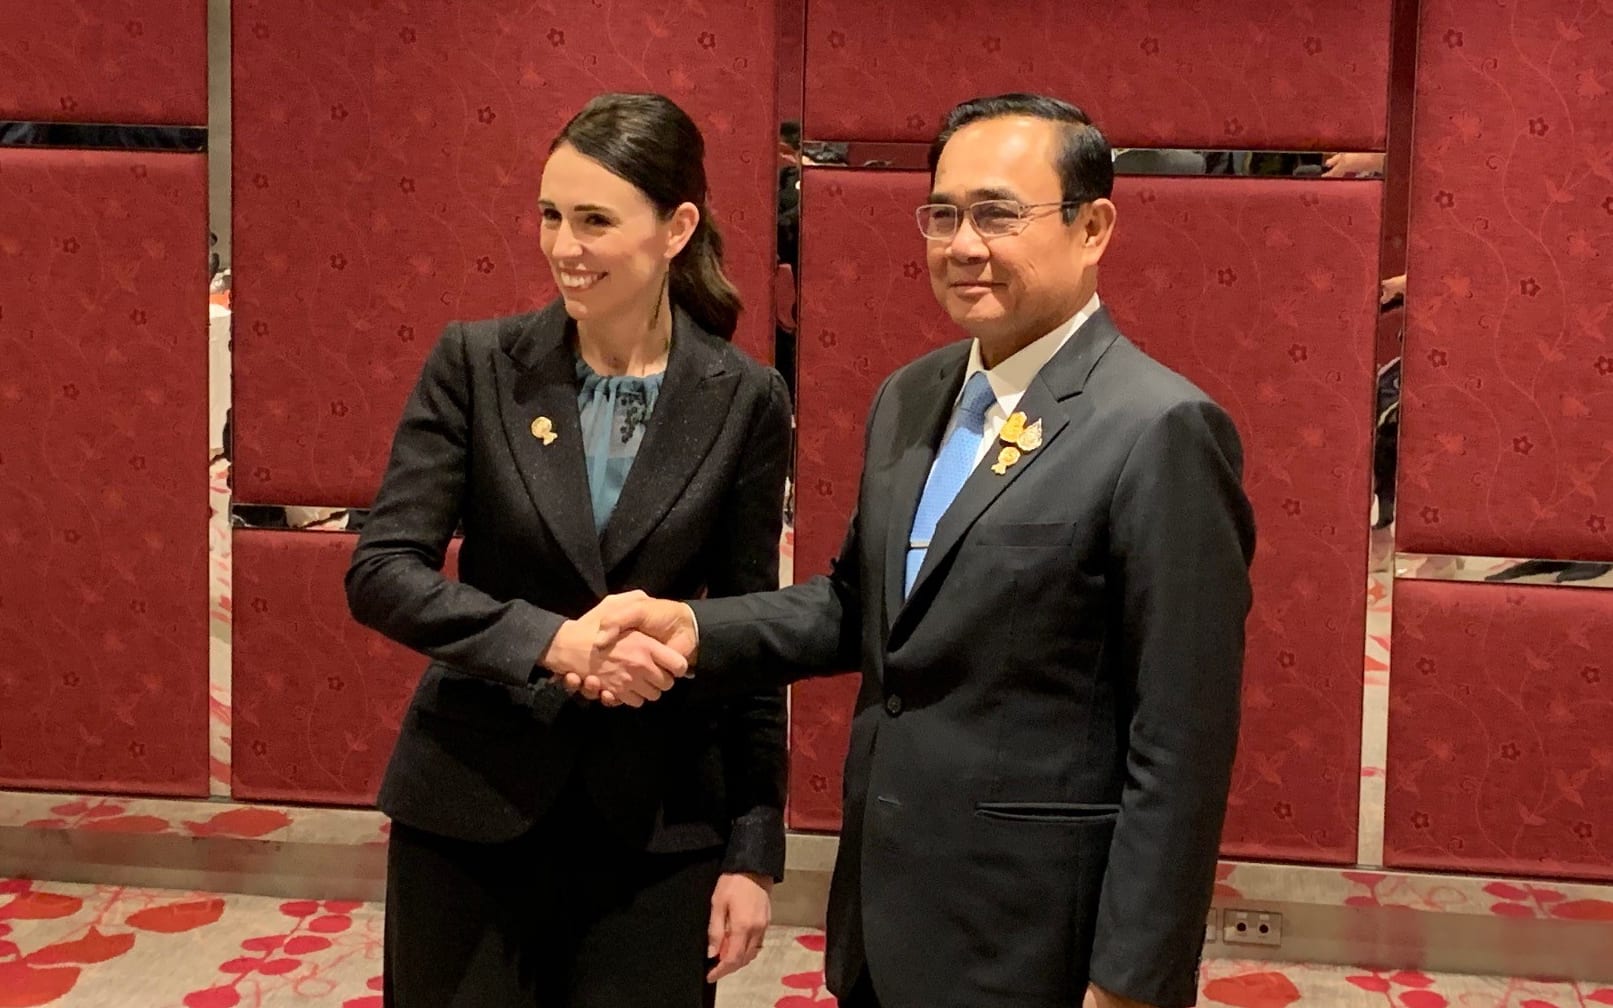 Prime Minister Jacinda Ardern meeting with Thai Prime Minister Prayut Chan-o-cha in Bangkok for the East Asian Summit.